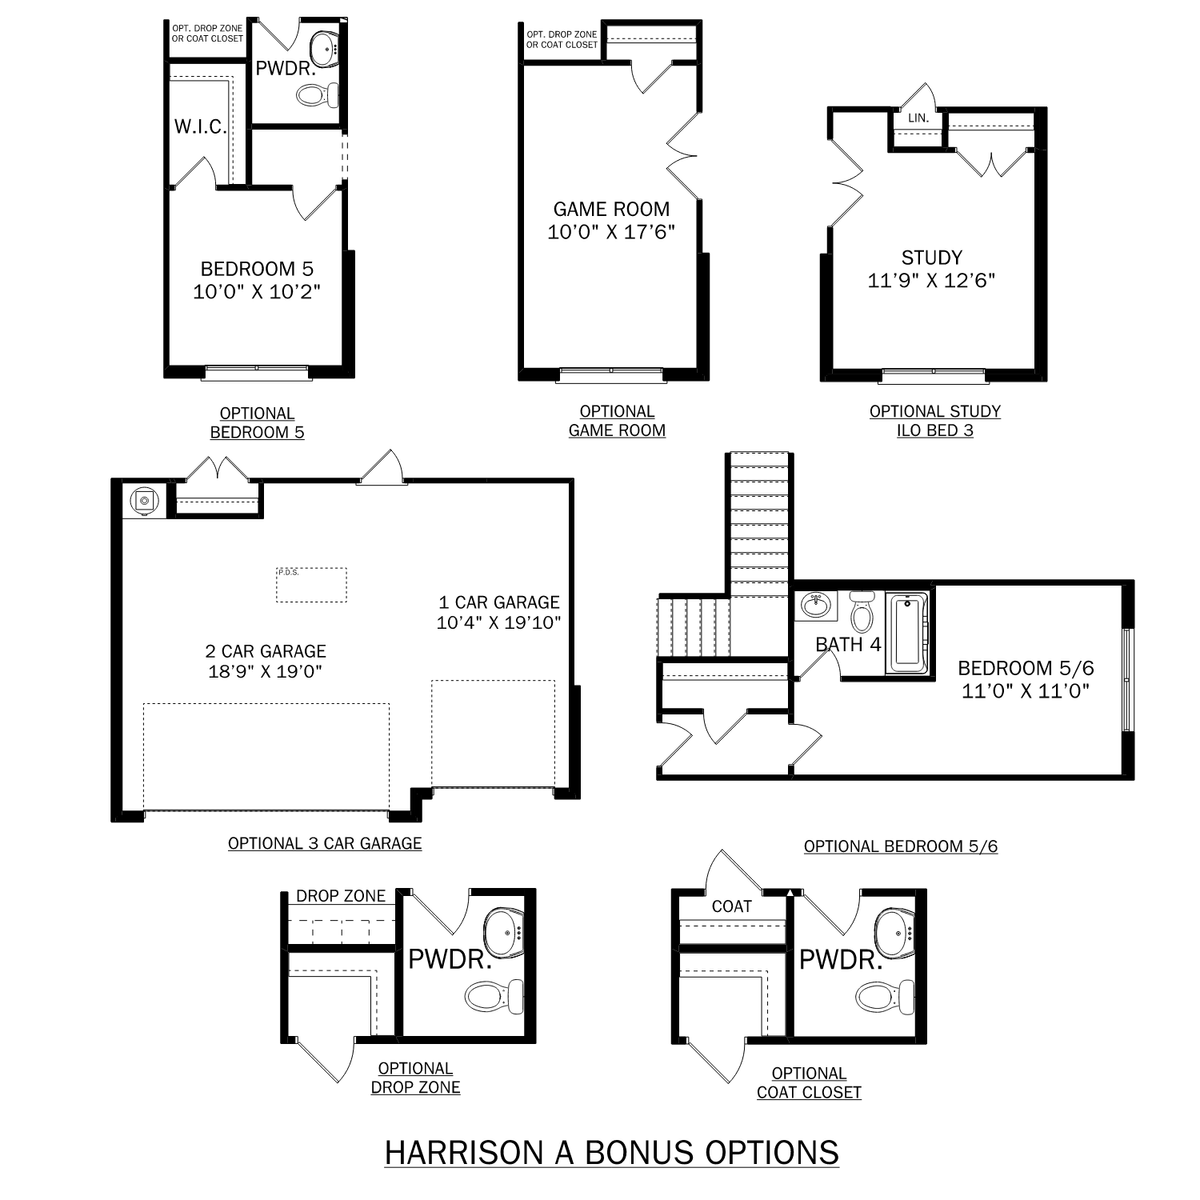 3 - The Harrison with Bonus buildable floor plan layout in Davidson Homes' Kendall Downs community.